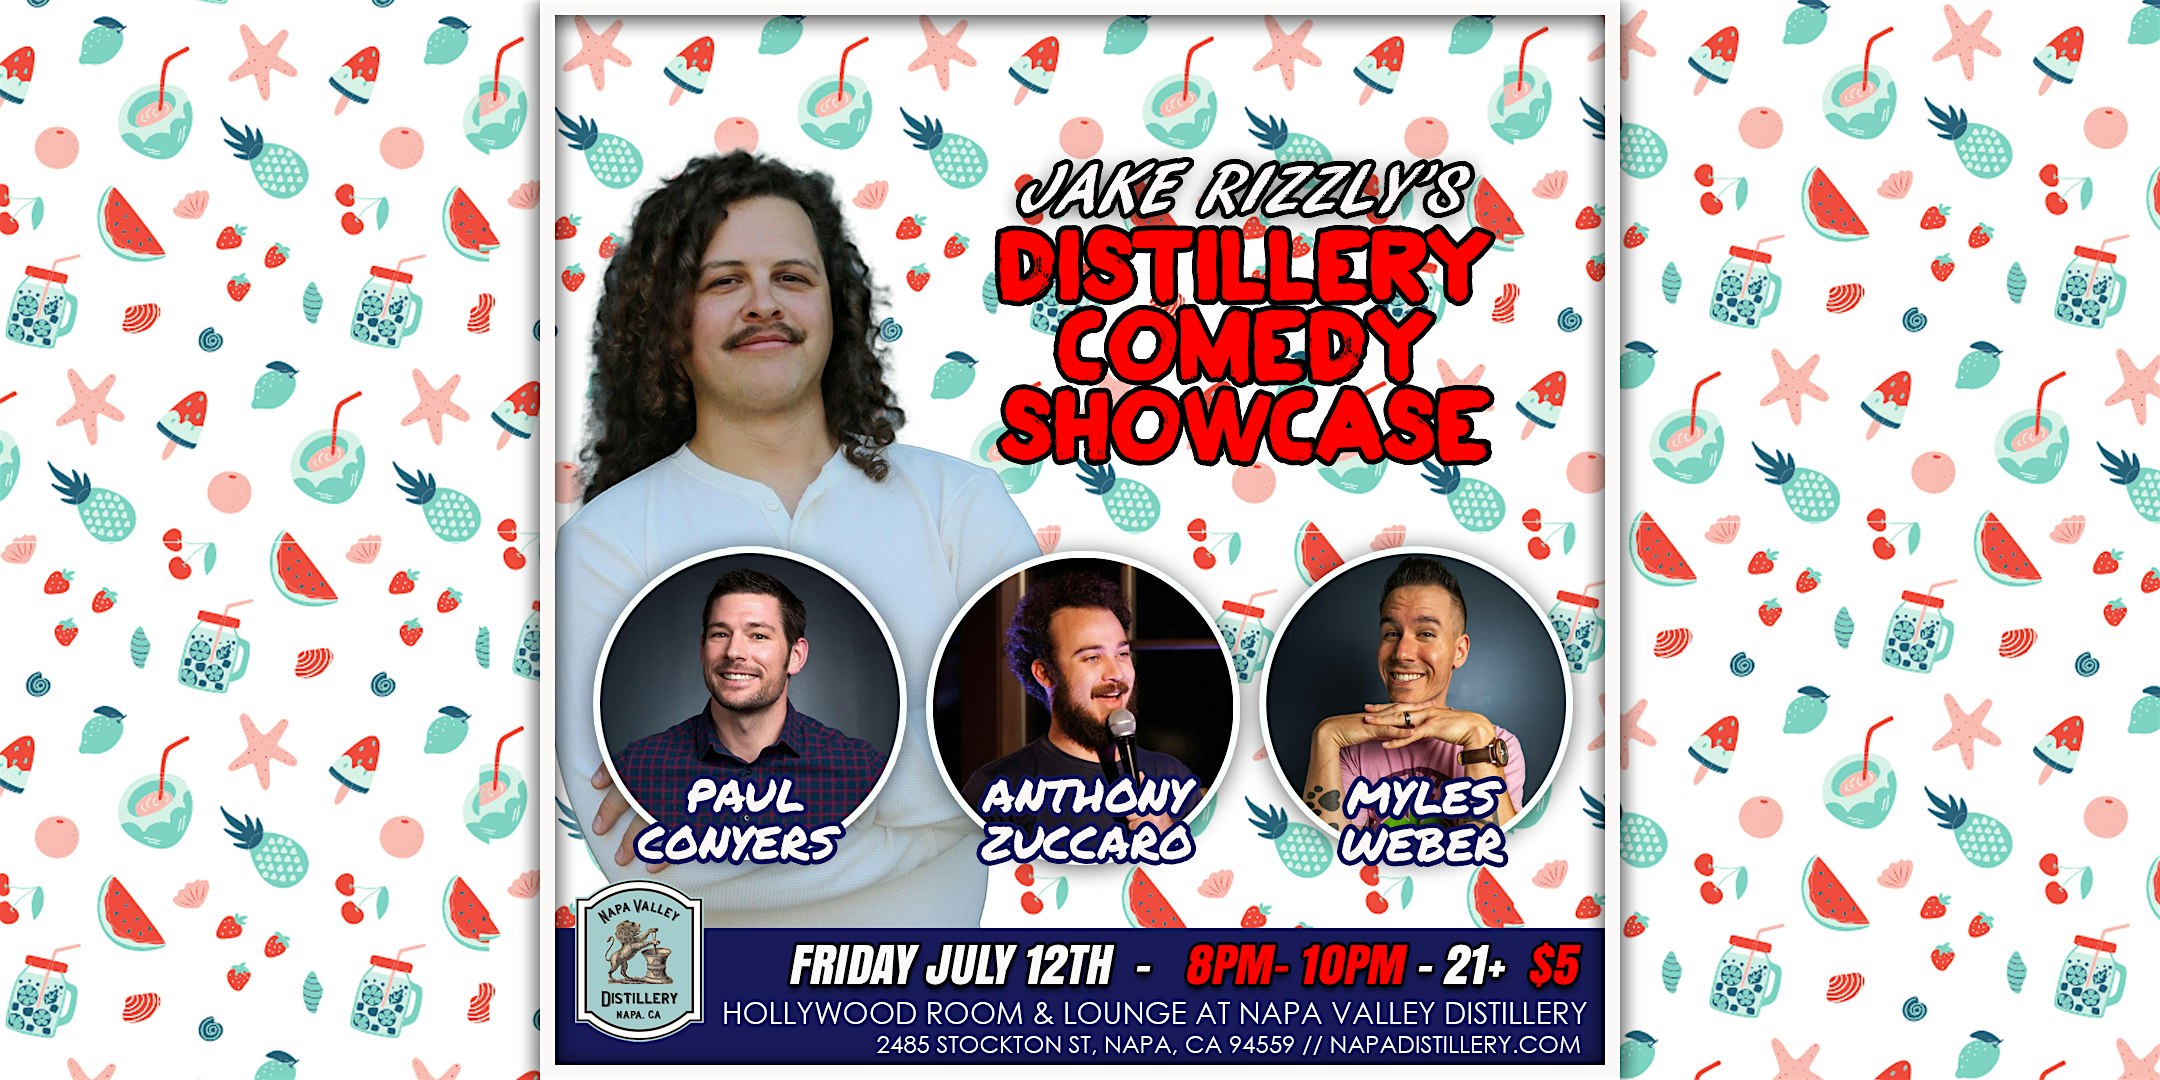 Jake Rizzly Stand-Up Comedy: Paul Conyers, Anthony Zuccaro & Myles Weber